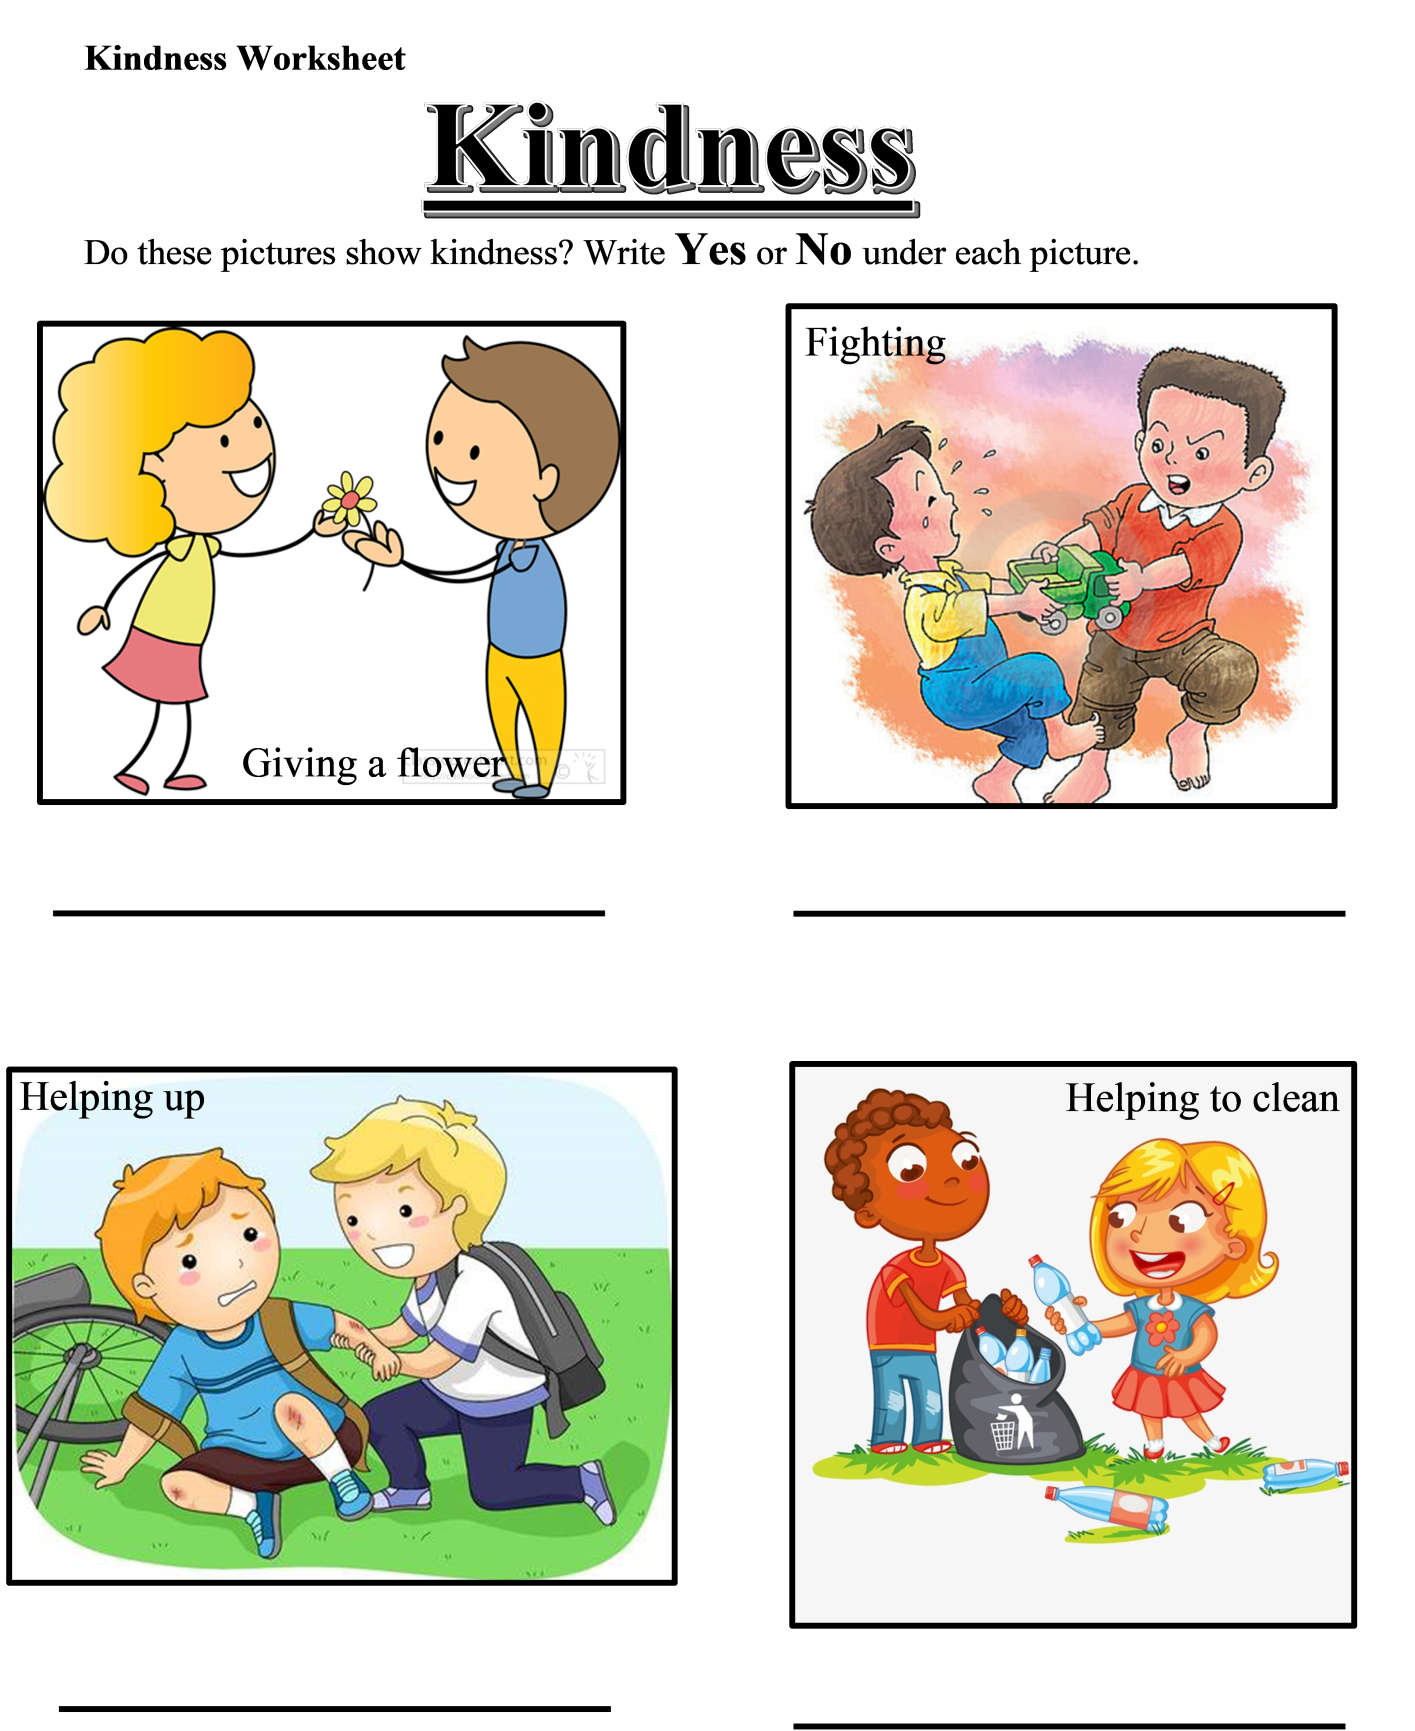 Kindness Worksheets. Kindness перевод. Picture for Kindness. Quotes about Kindness. We were told about showing kindness